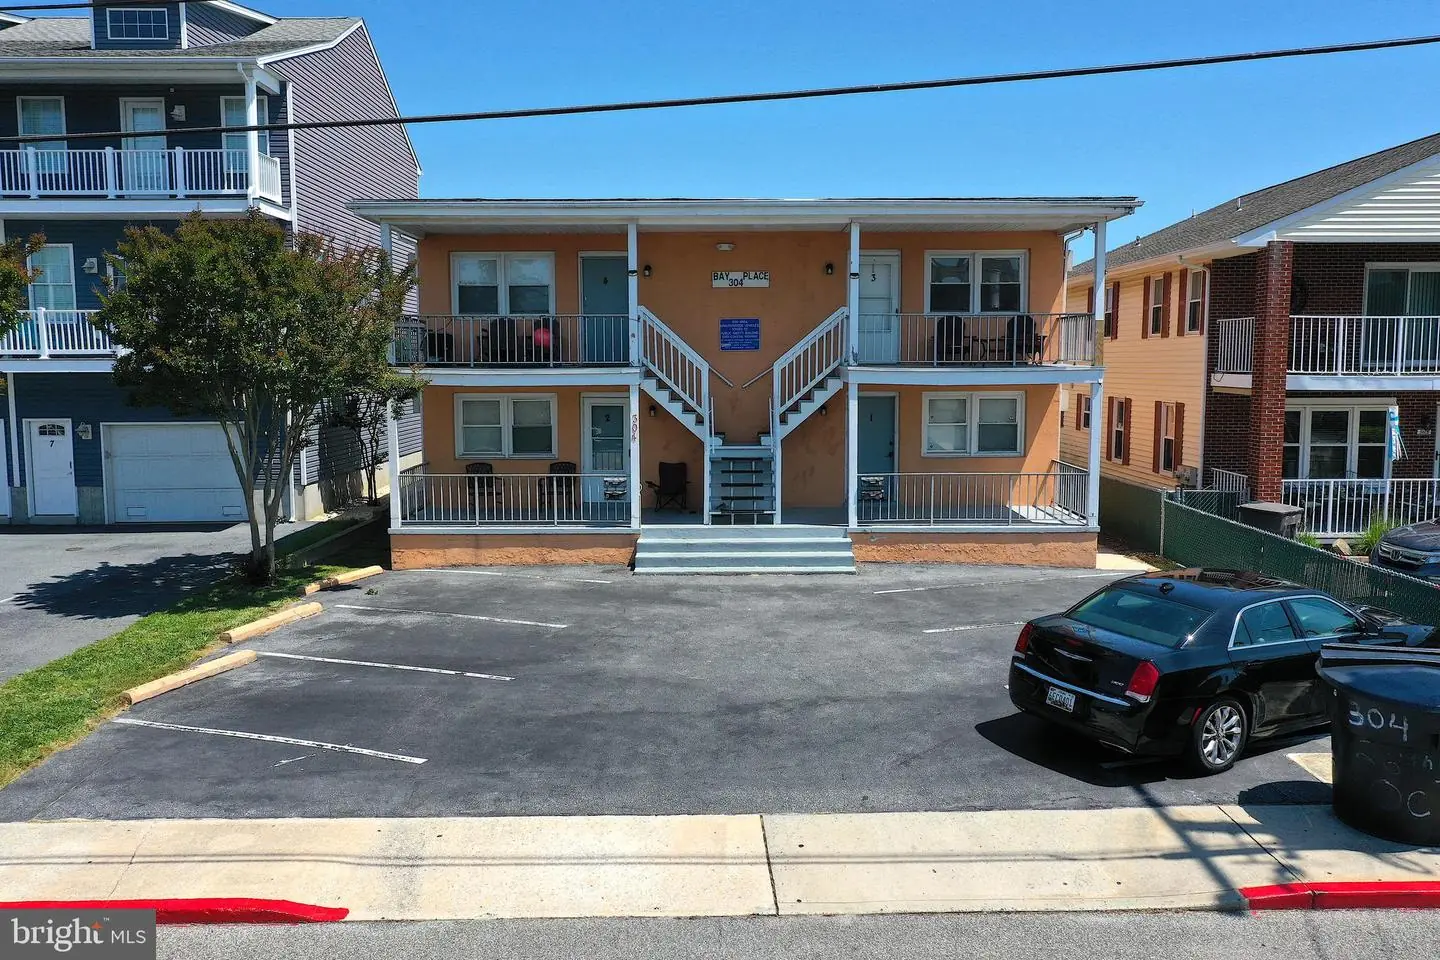 MDWO2014486-802399887958-2023-11-29-12-09-02 304 26th St | Ocean City, MD Real Estate For Sale | MLS# Mdwo2014486  - 1st Choice Properties